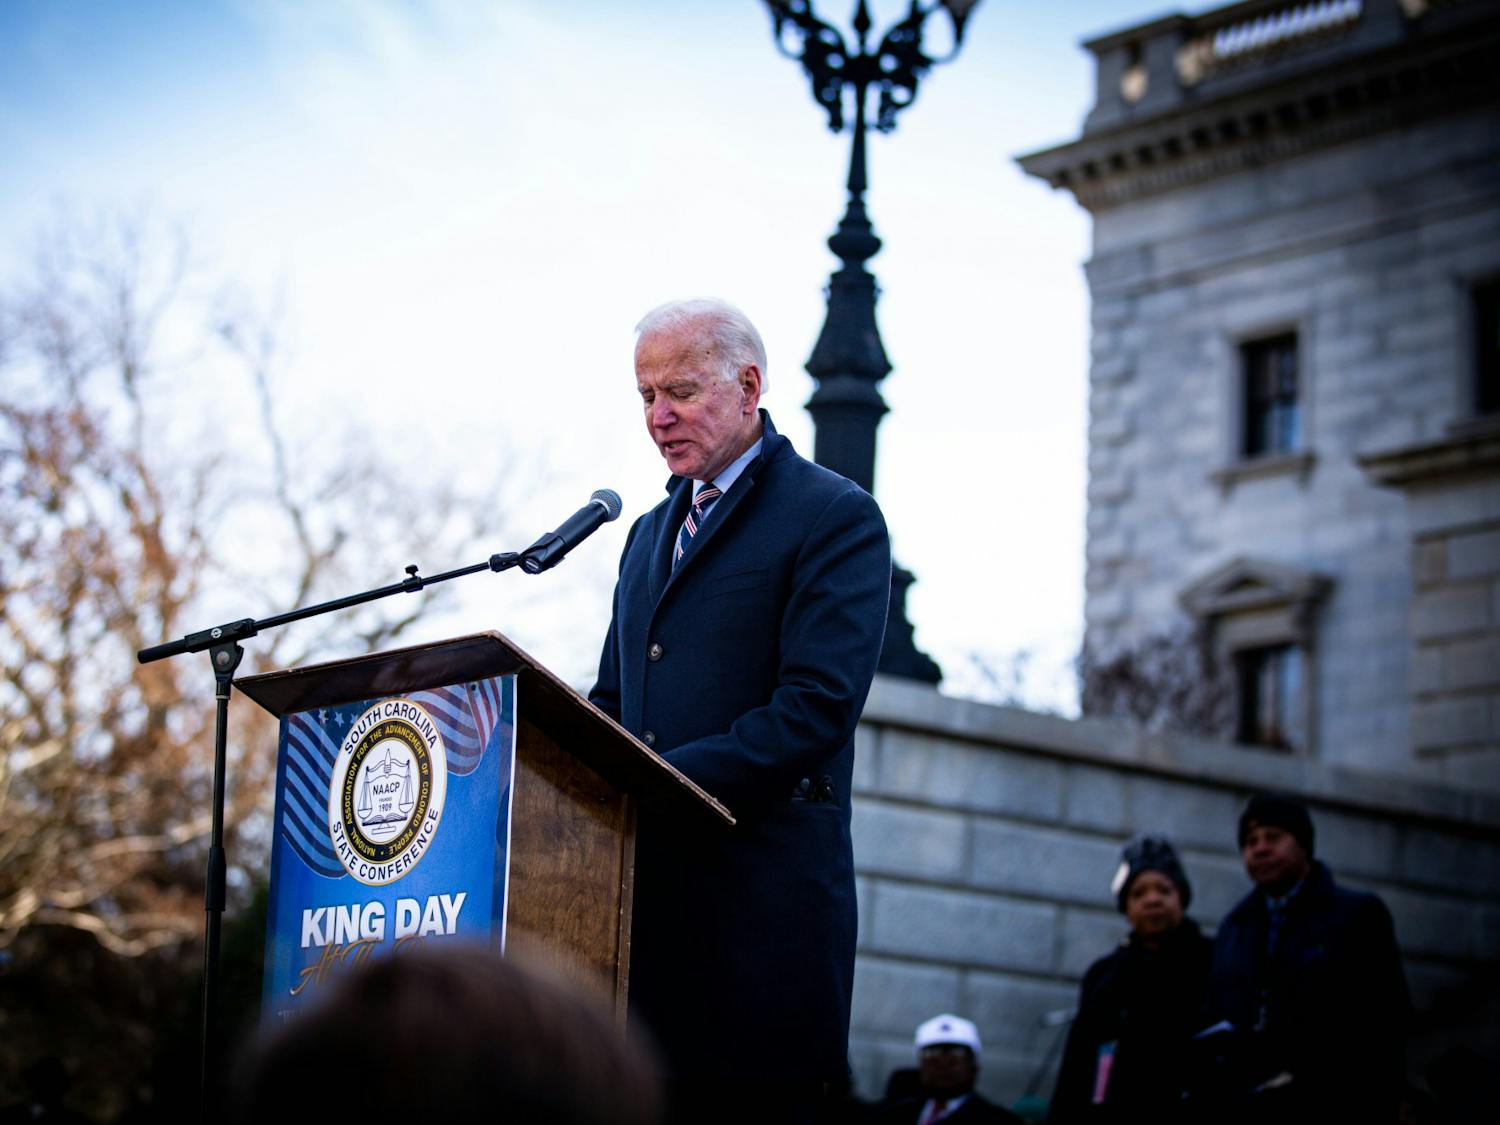 Democratic presidential candidate Joe Biden speaks at the Statehouse for the King Day at the Dome event on Martin Luther King Jr. Day Jan. 20.